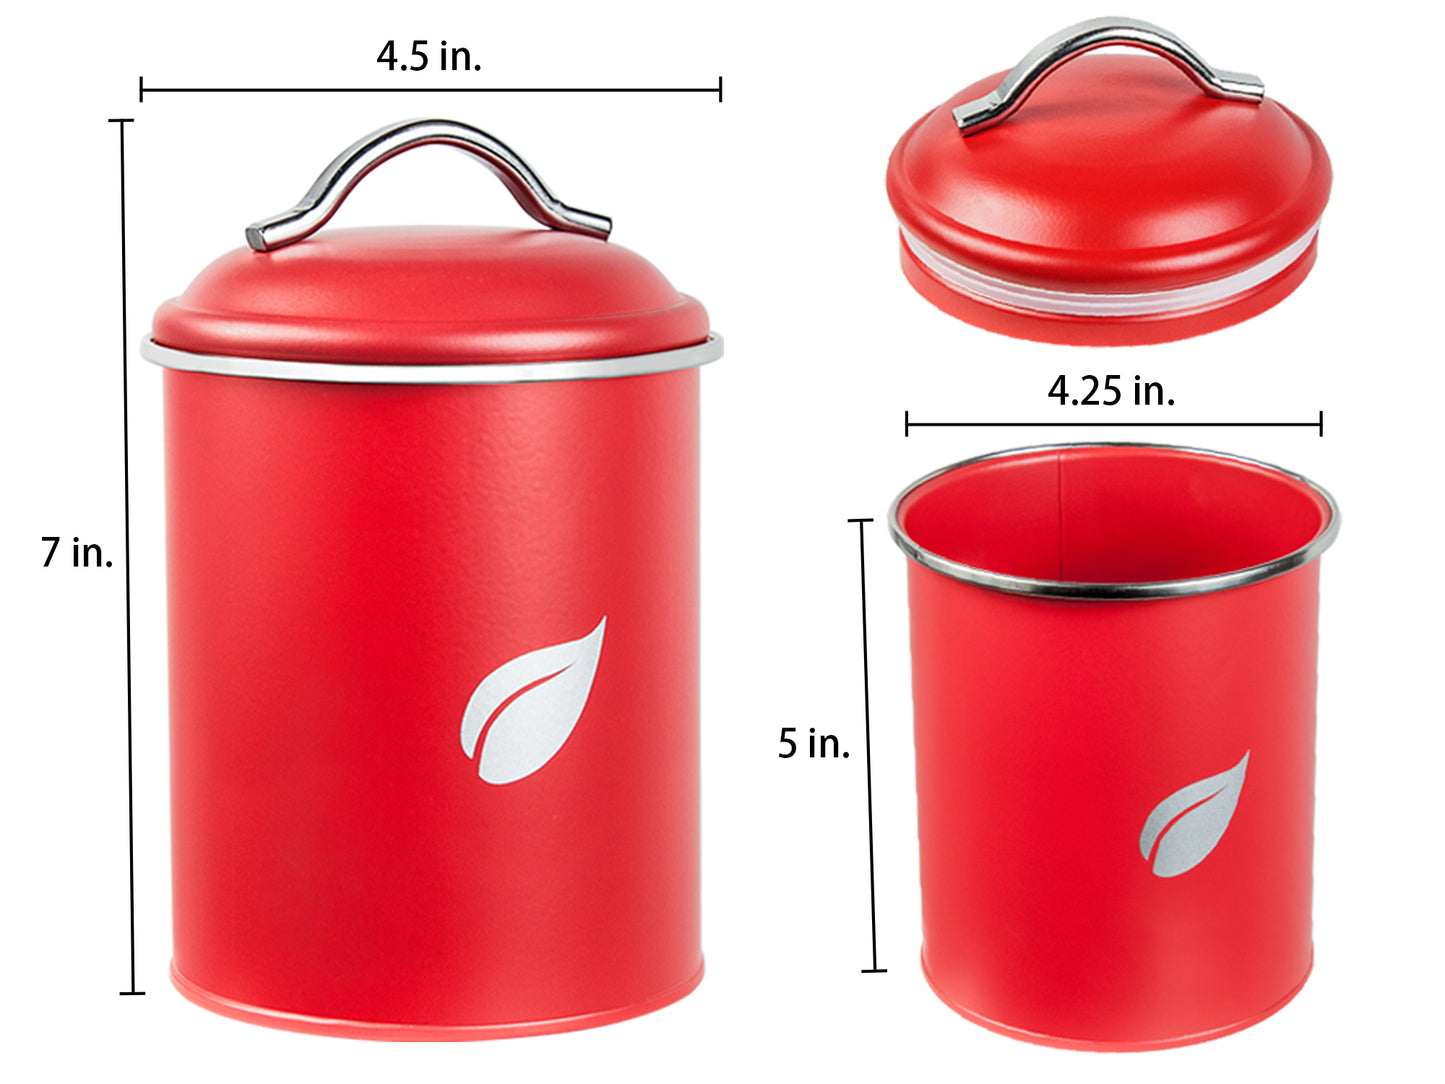 Saf-Care Kitchen Canisters - Modern Kitchen Decoration of Canister Set with Multiple Preservation Purposes by Tight Sealed Lids, Set of 3, Valentine Red, Model-SC-002-Red